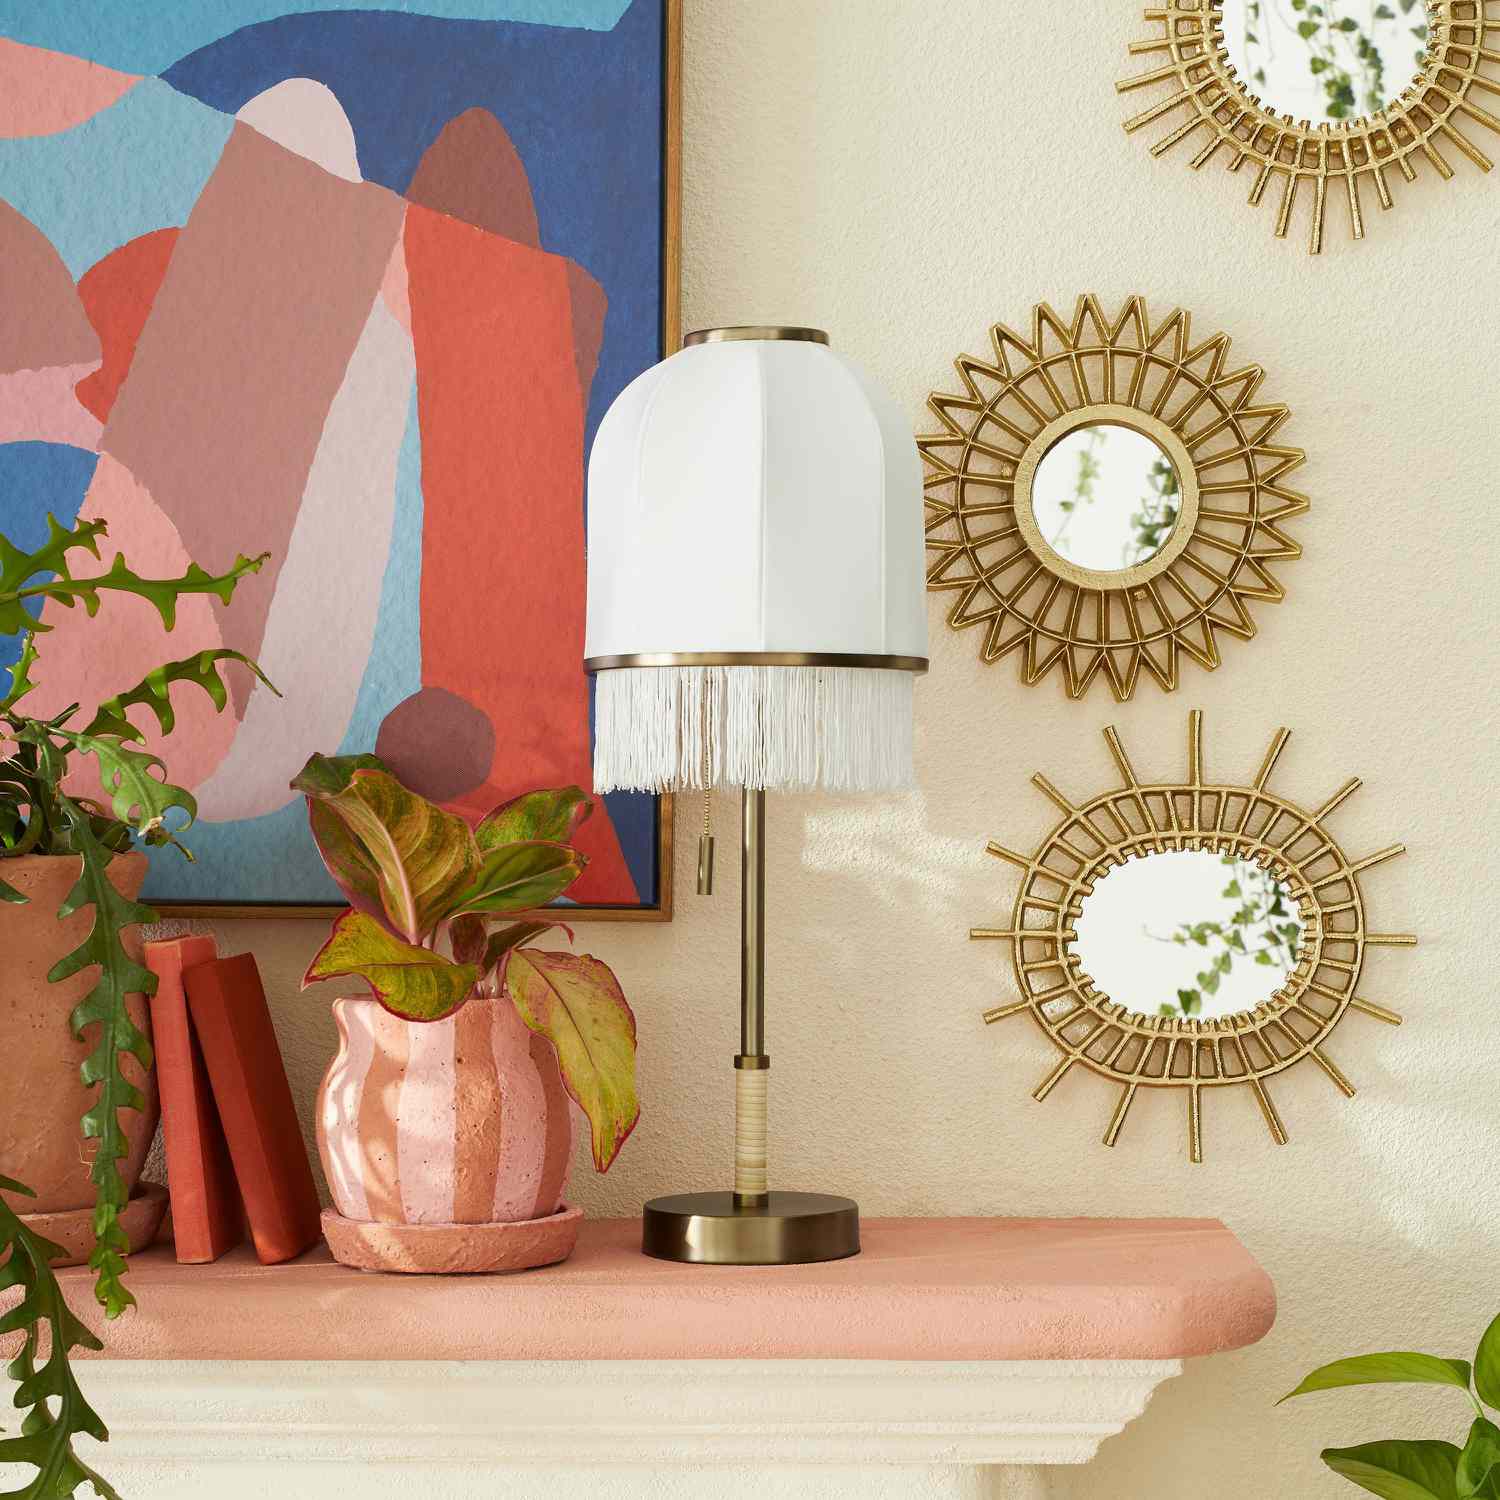 Euclid Fabric Table Lamp from Justina Blakeney x Opalhouse collection at Target